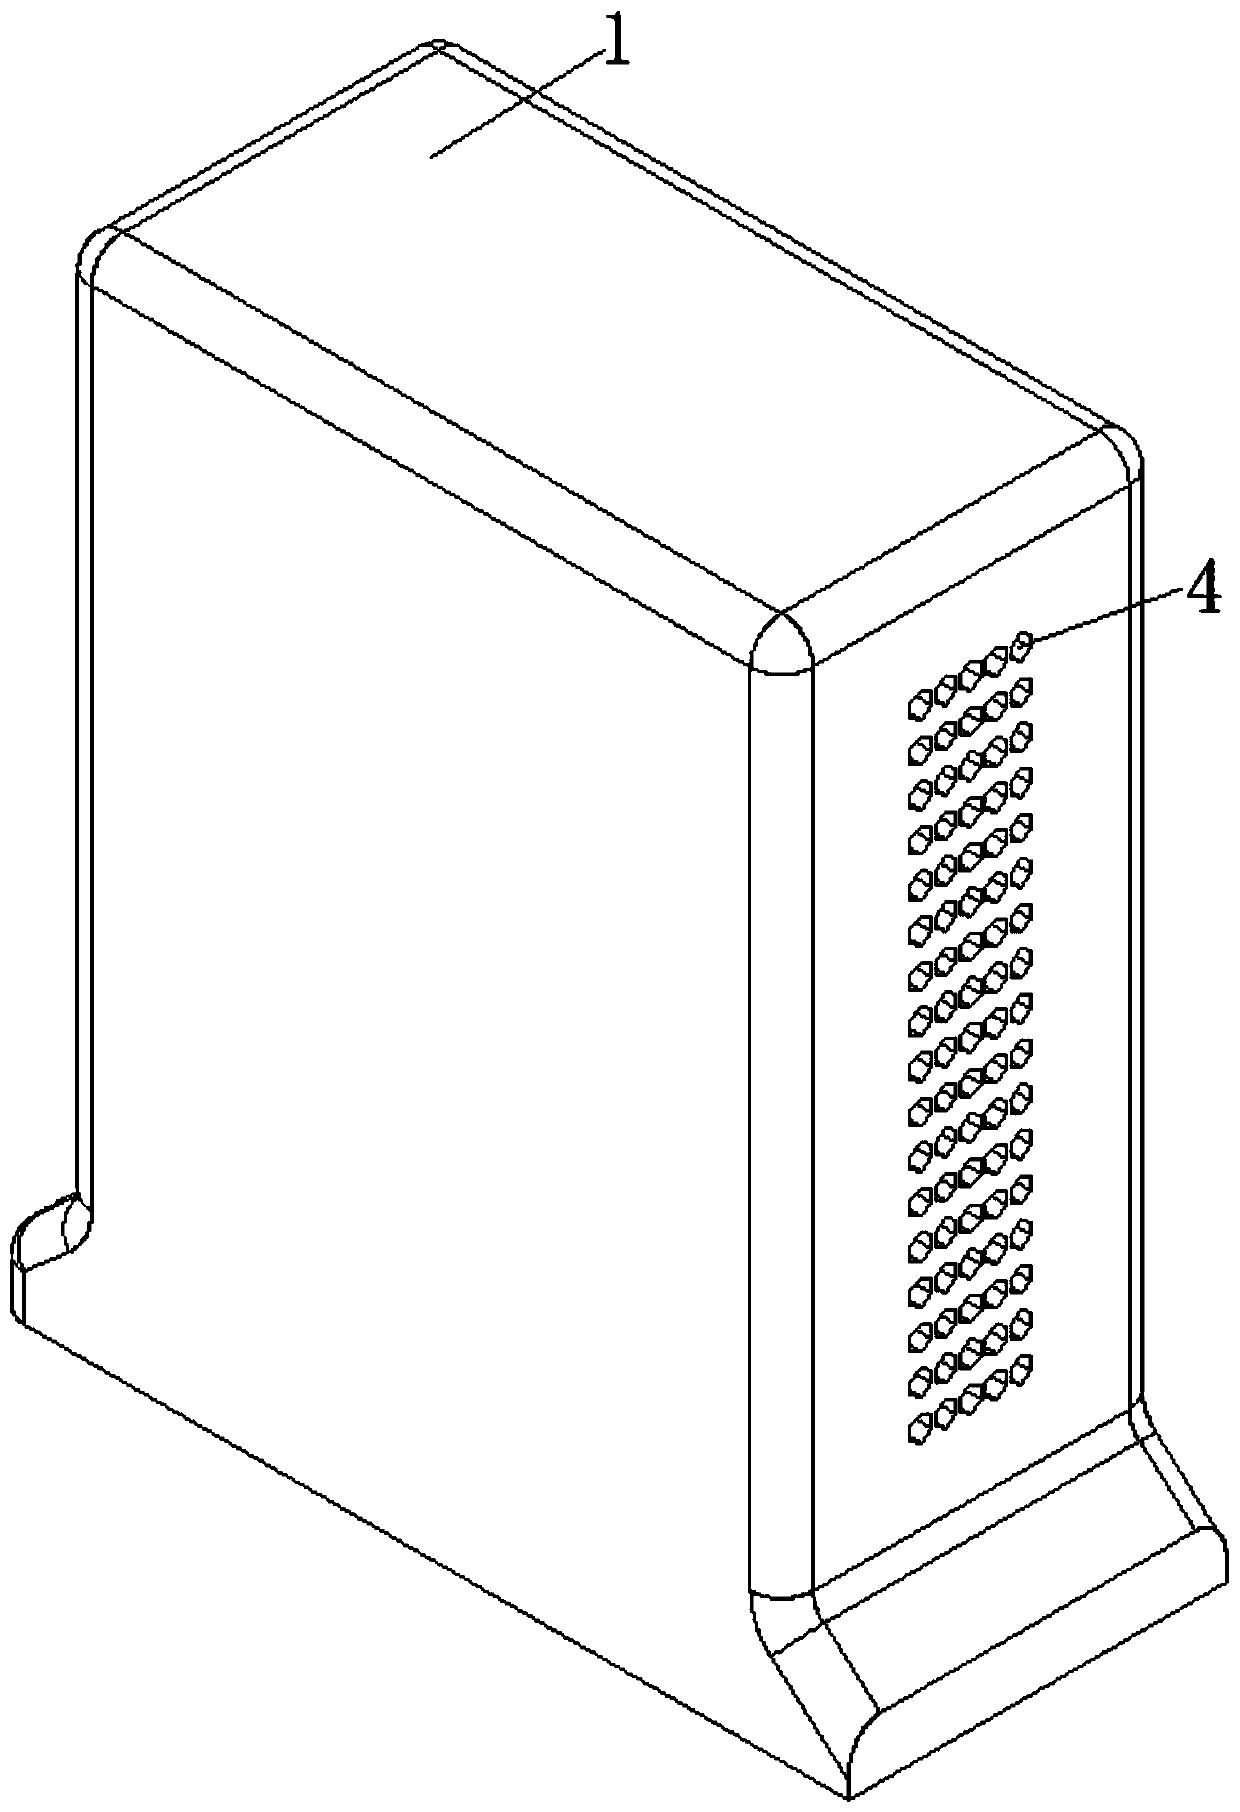 A water-cooled computer main chassis with turbulence type two-way ventilation